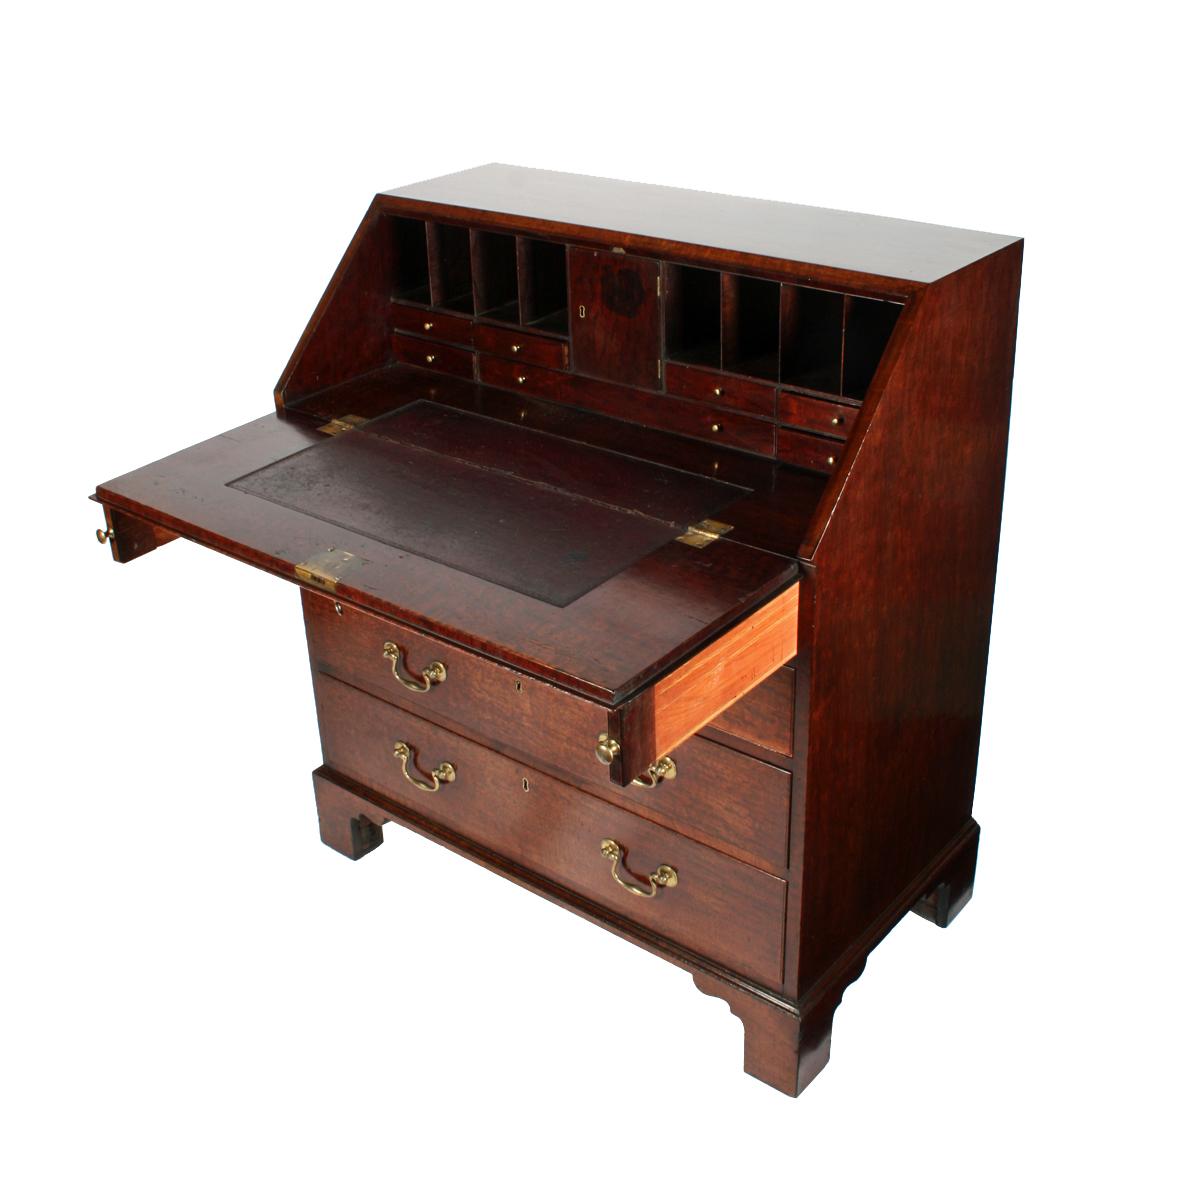 An 18th century Georgian bureau made from the finest 'Plum Pudding' mahogany.

The bureau has two short drawers over three graduated long drawers with original brass swan neck handles and solid oak linings.

The interior has a leather covered